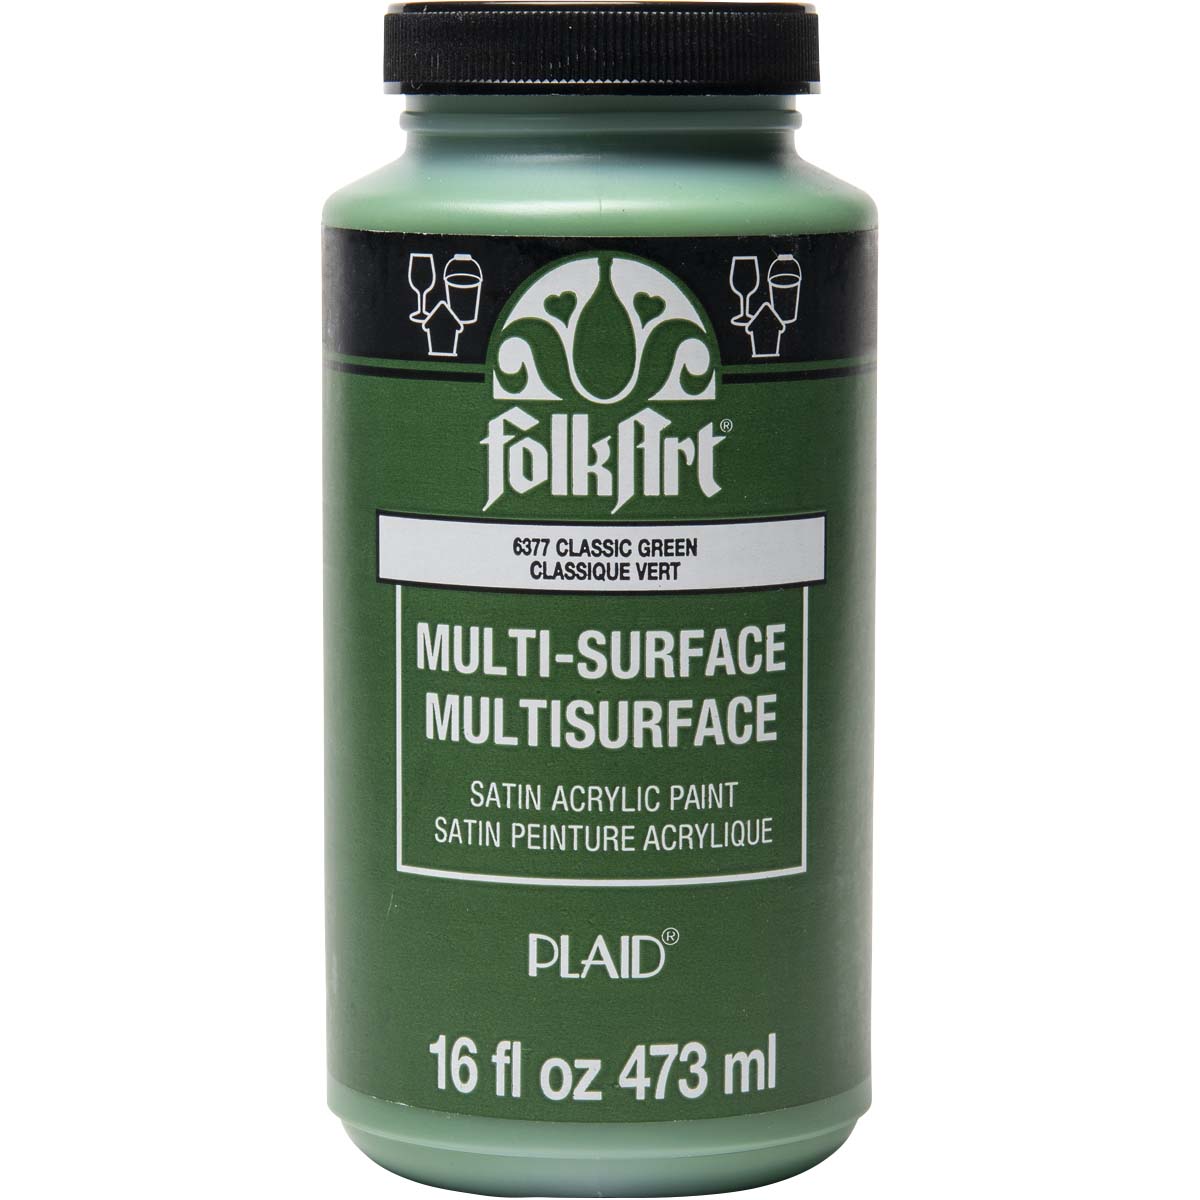 FolkArt Multi-Surface Acrylic Paint 59ml - The Drawing Room